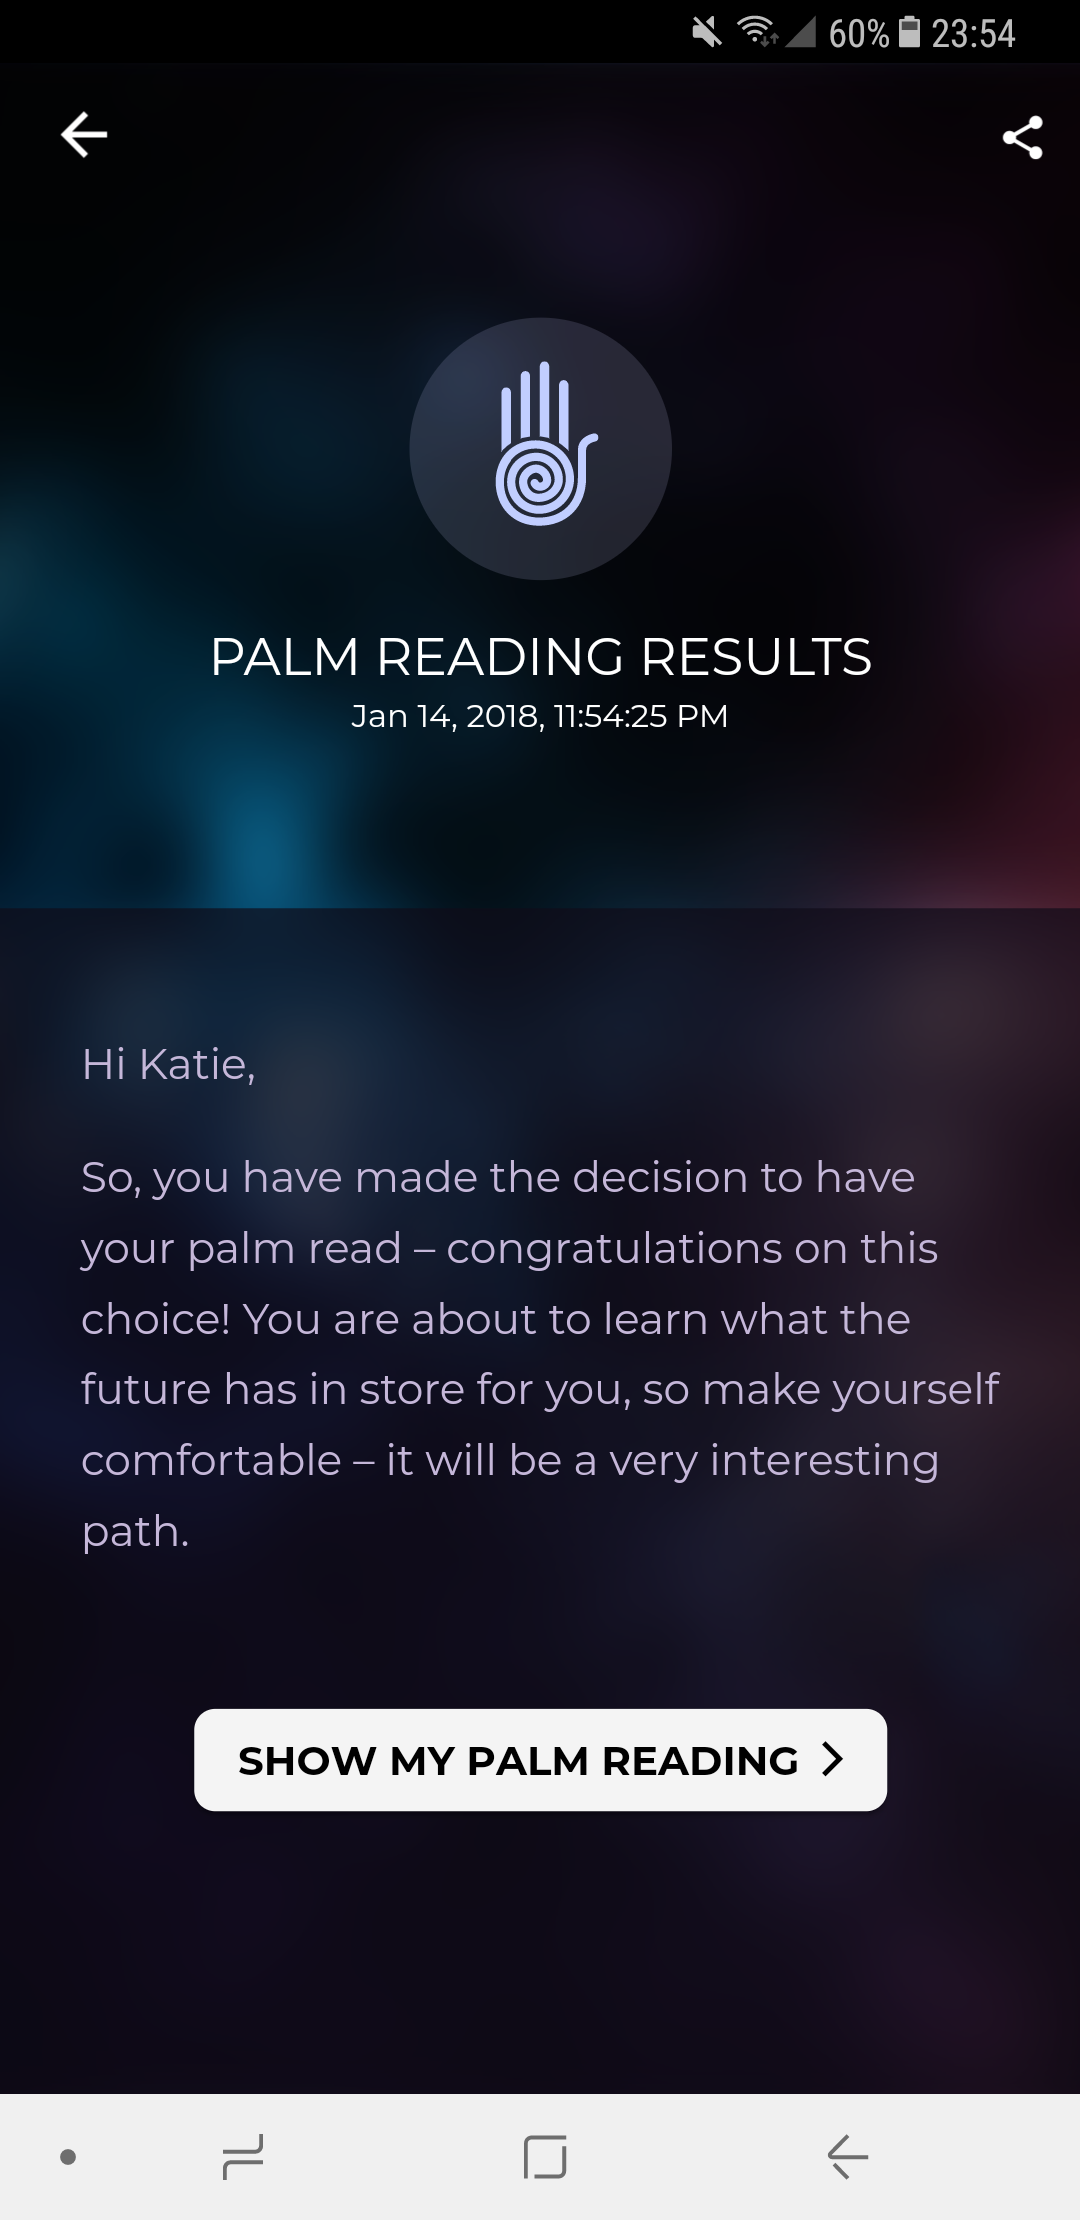 A screenshot of the palm reading app